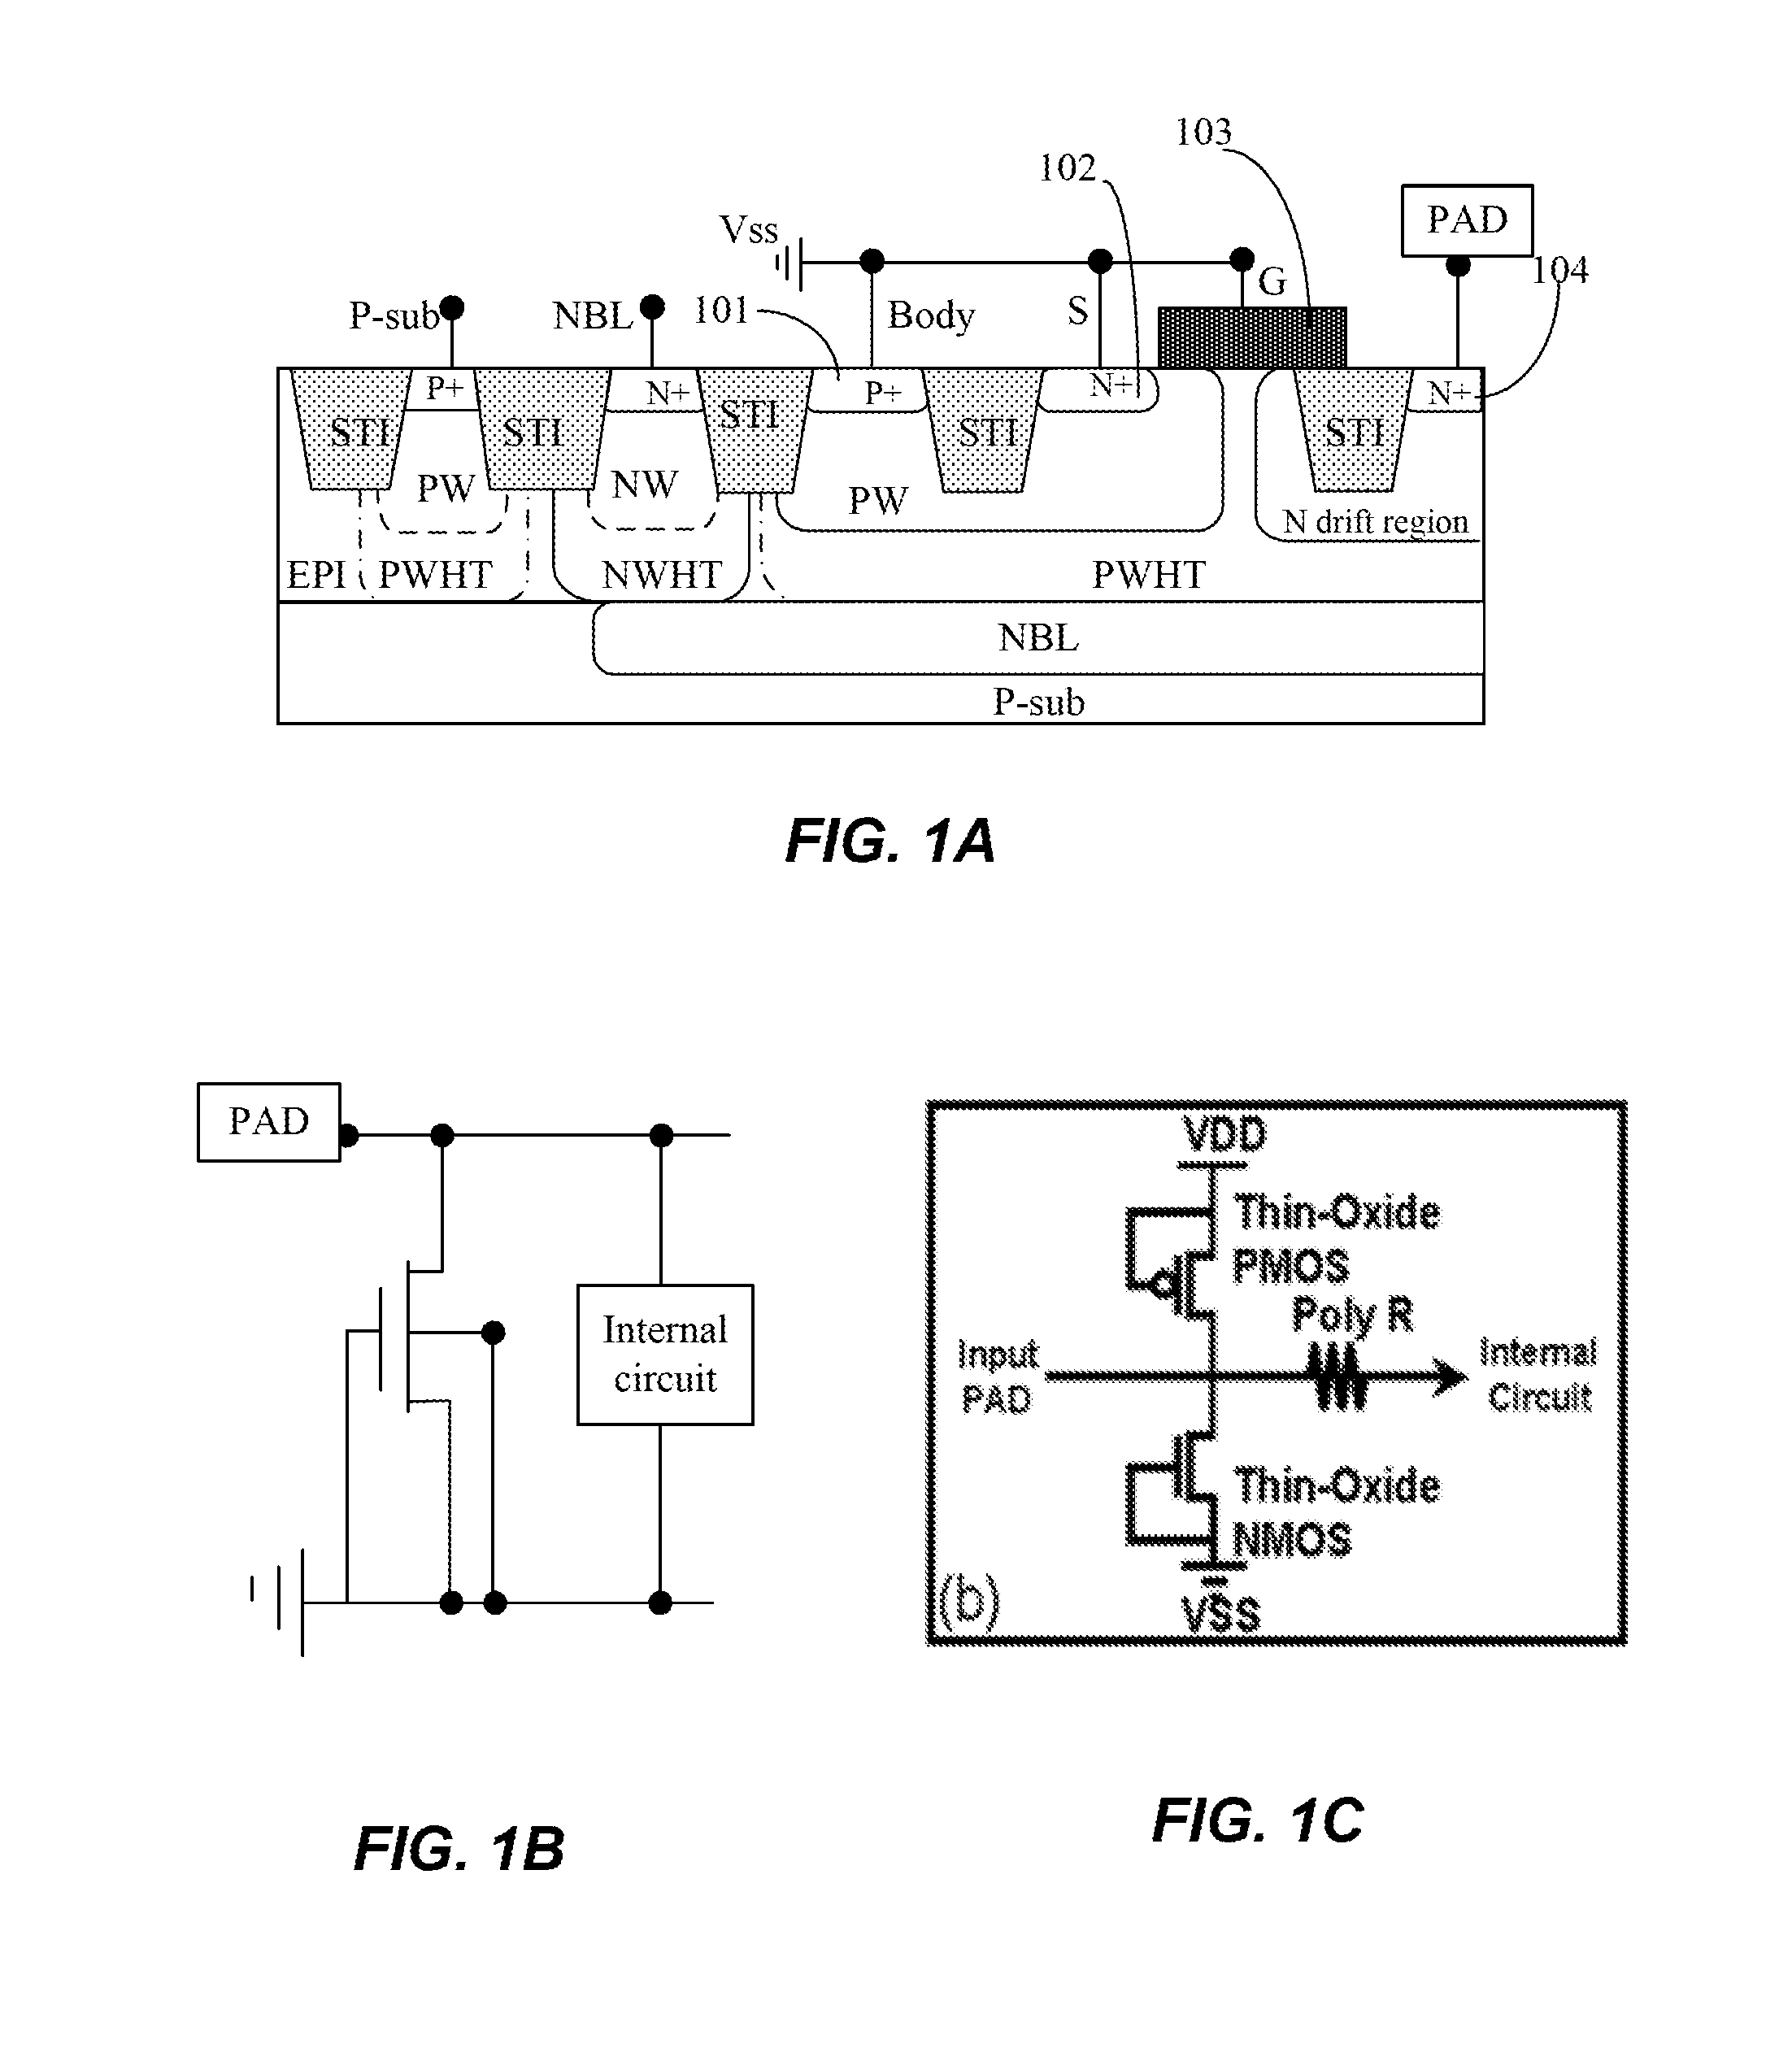 Electrostatic discharge protection structure in a semiconductor device